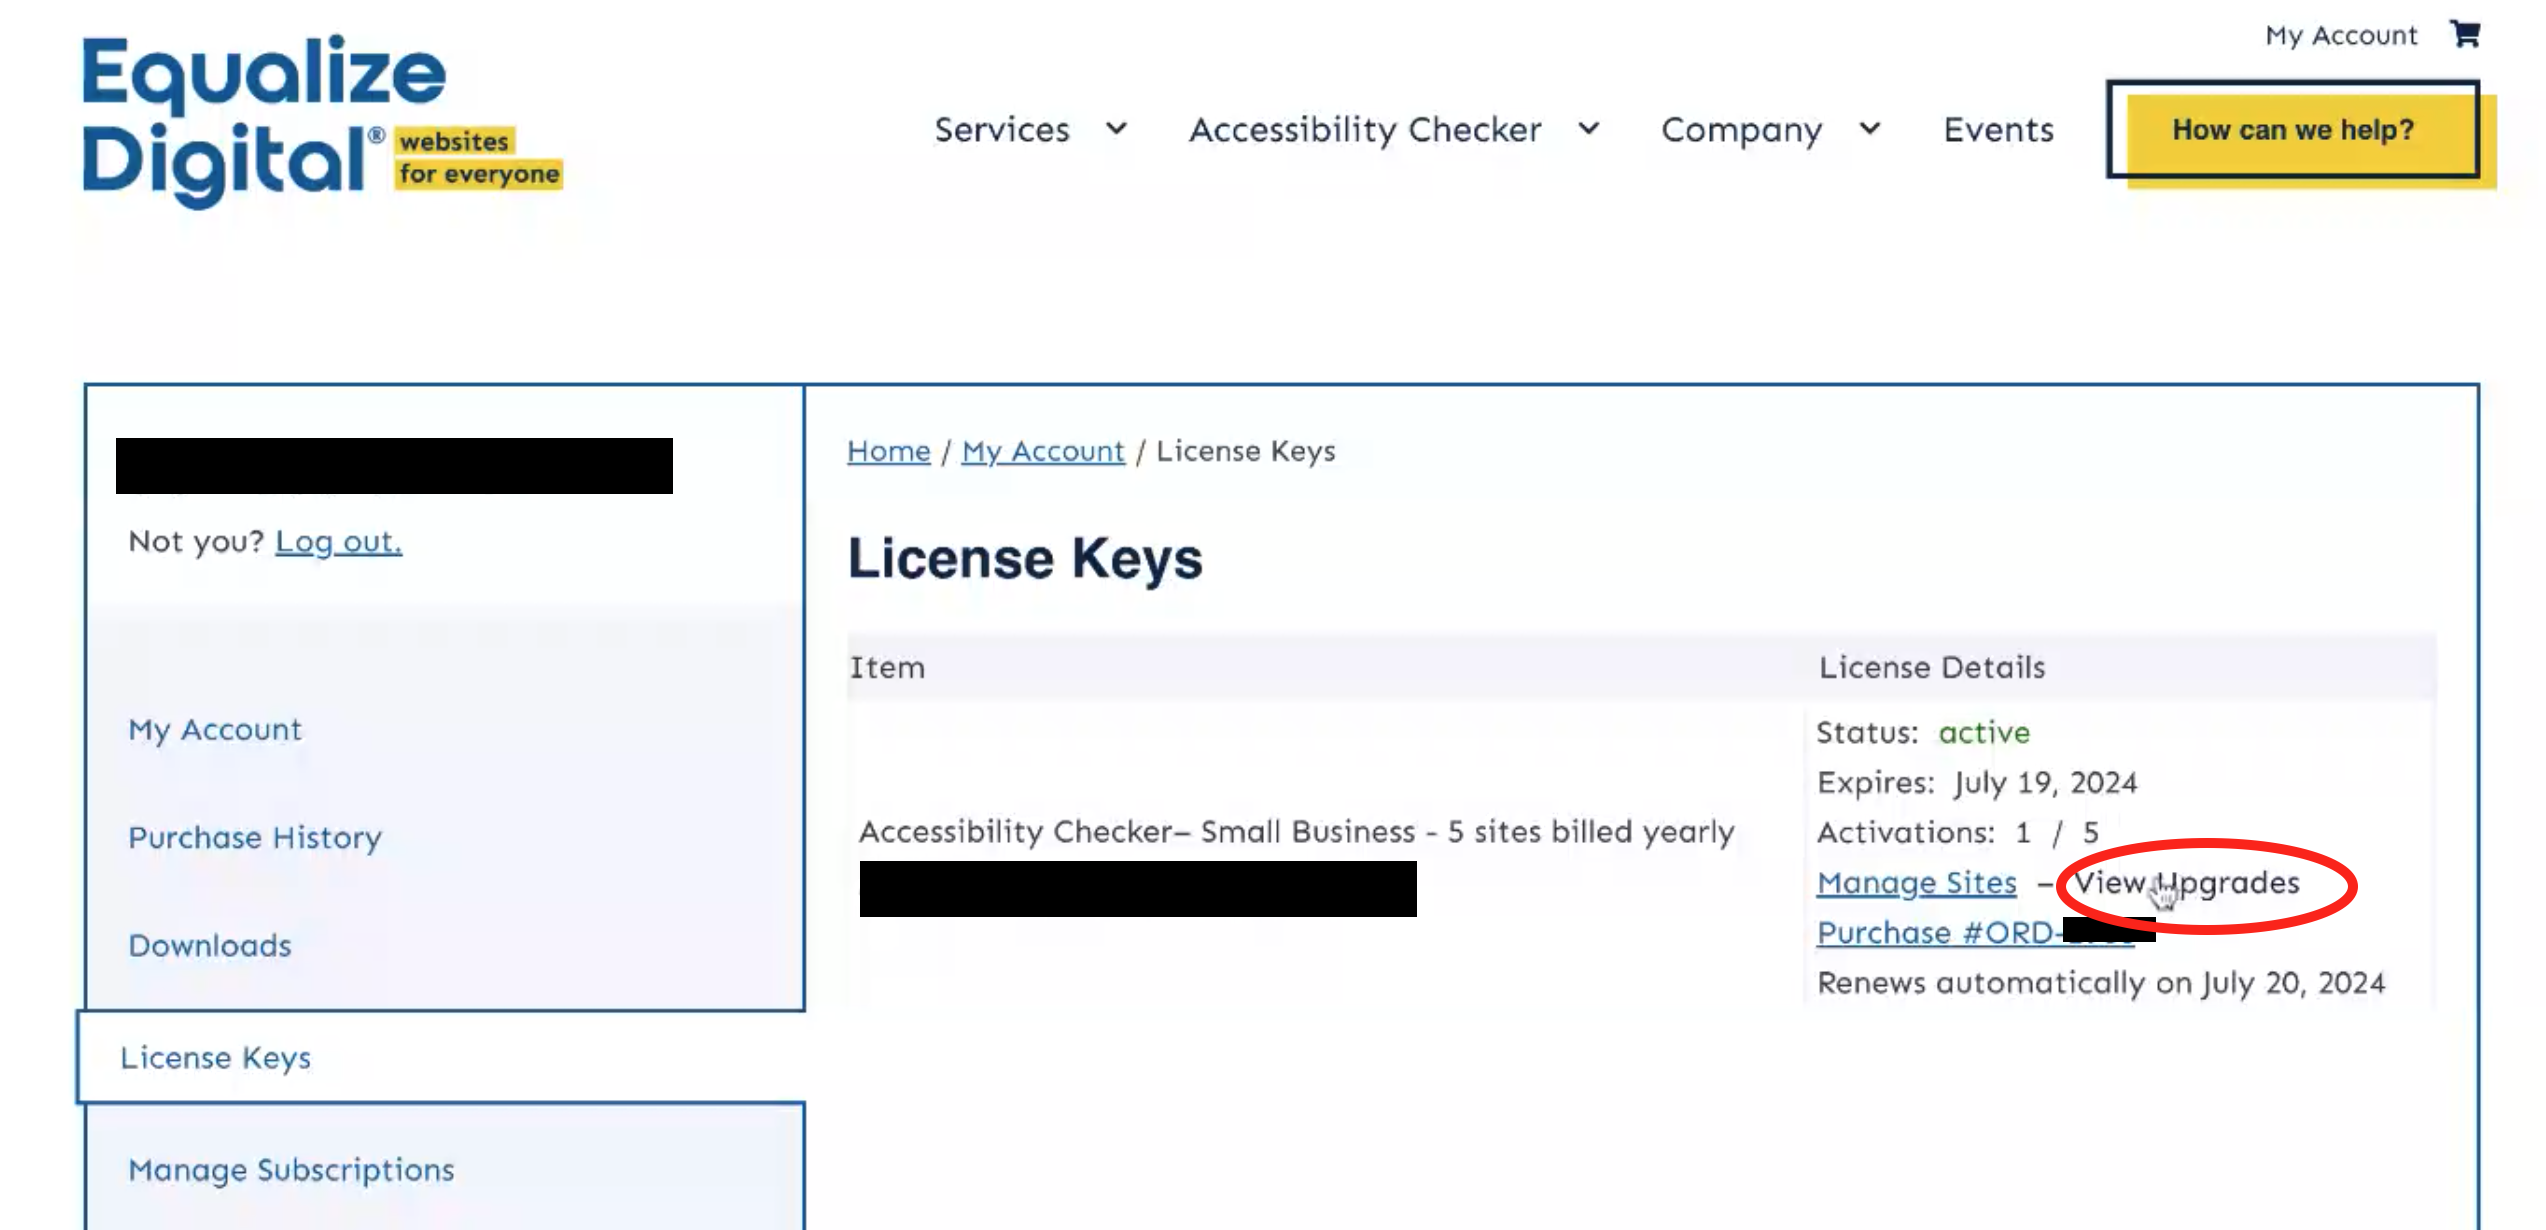 The view upgrades link is found in the License Keys table in the License Details column.